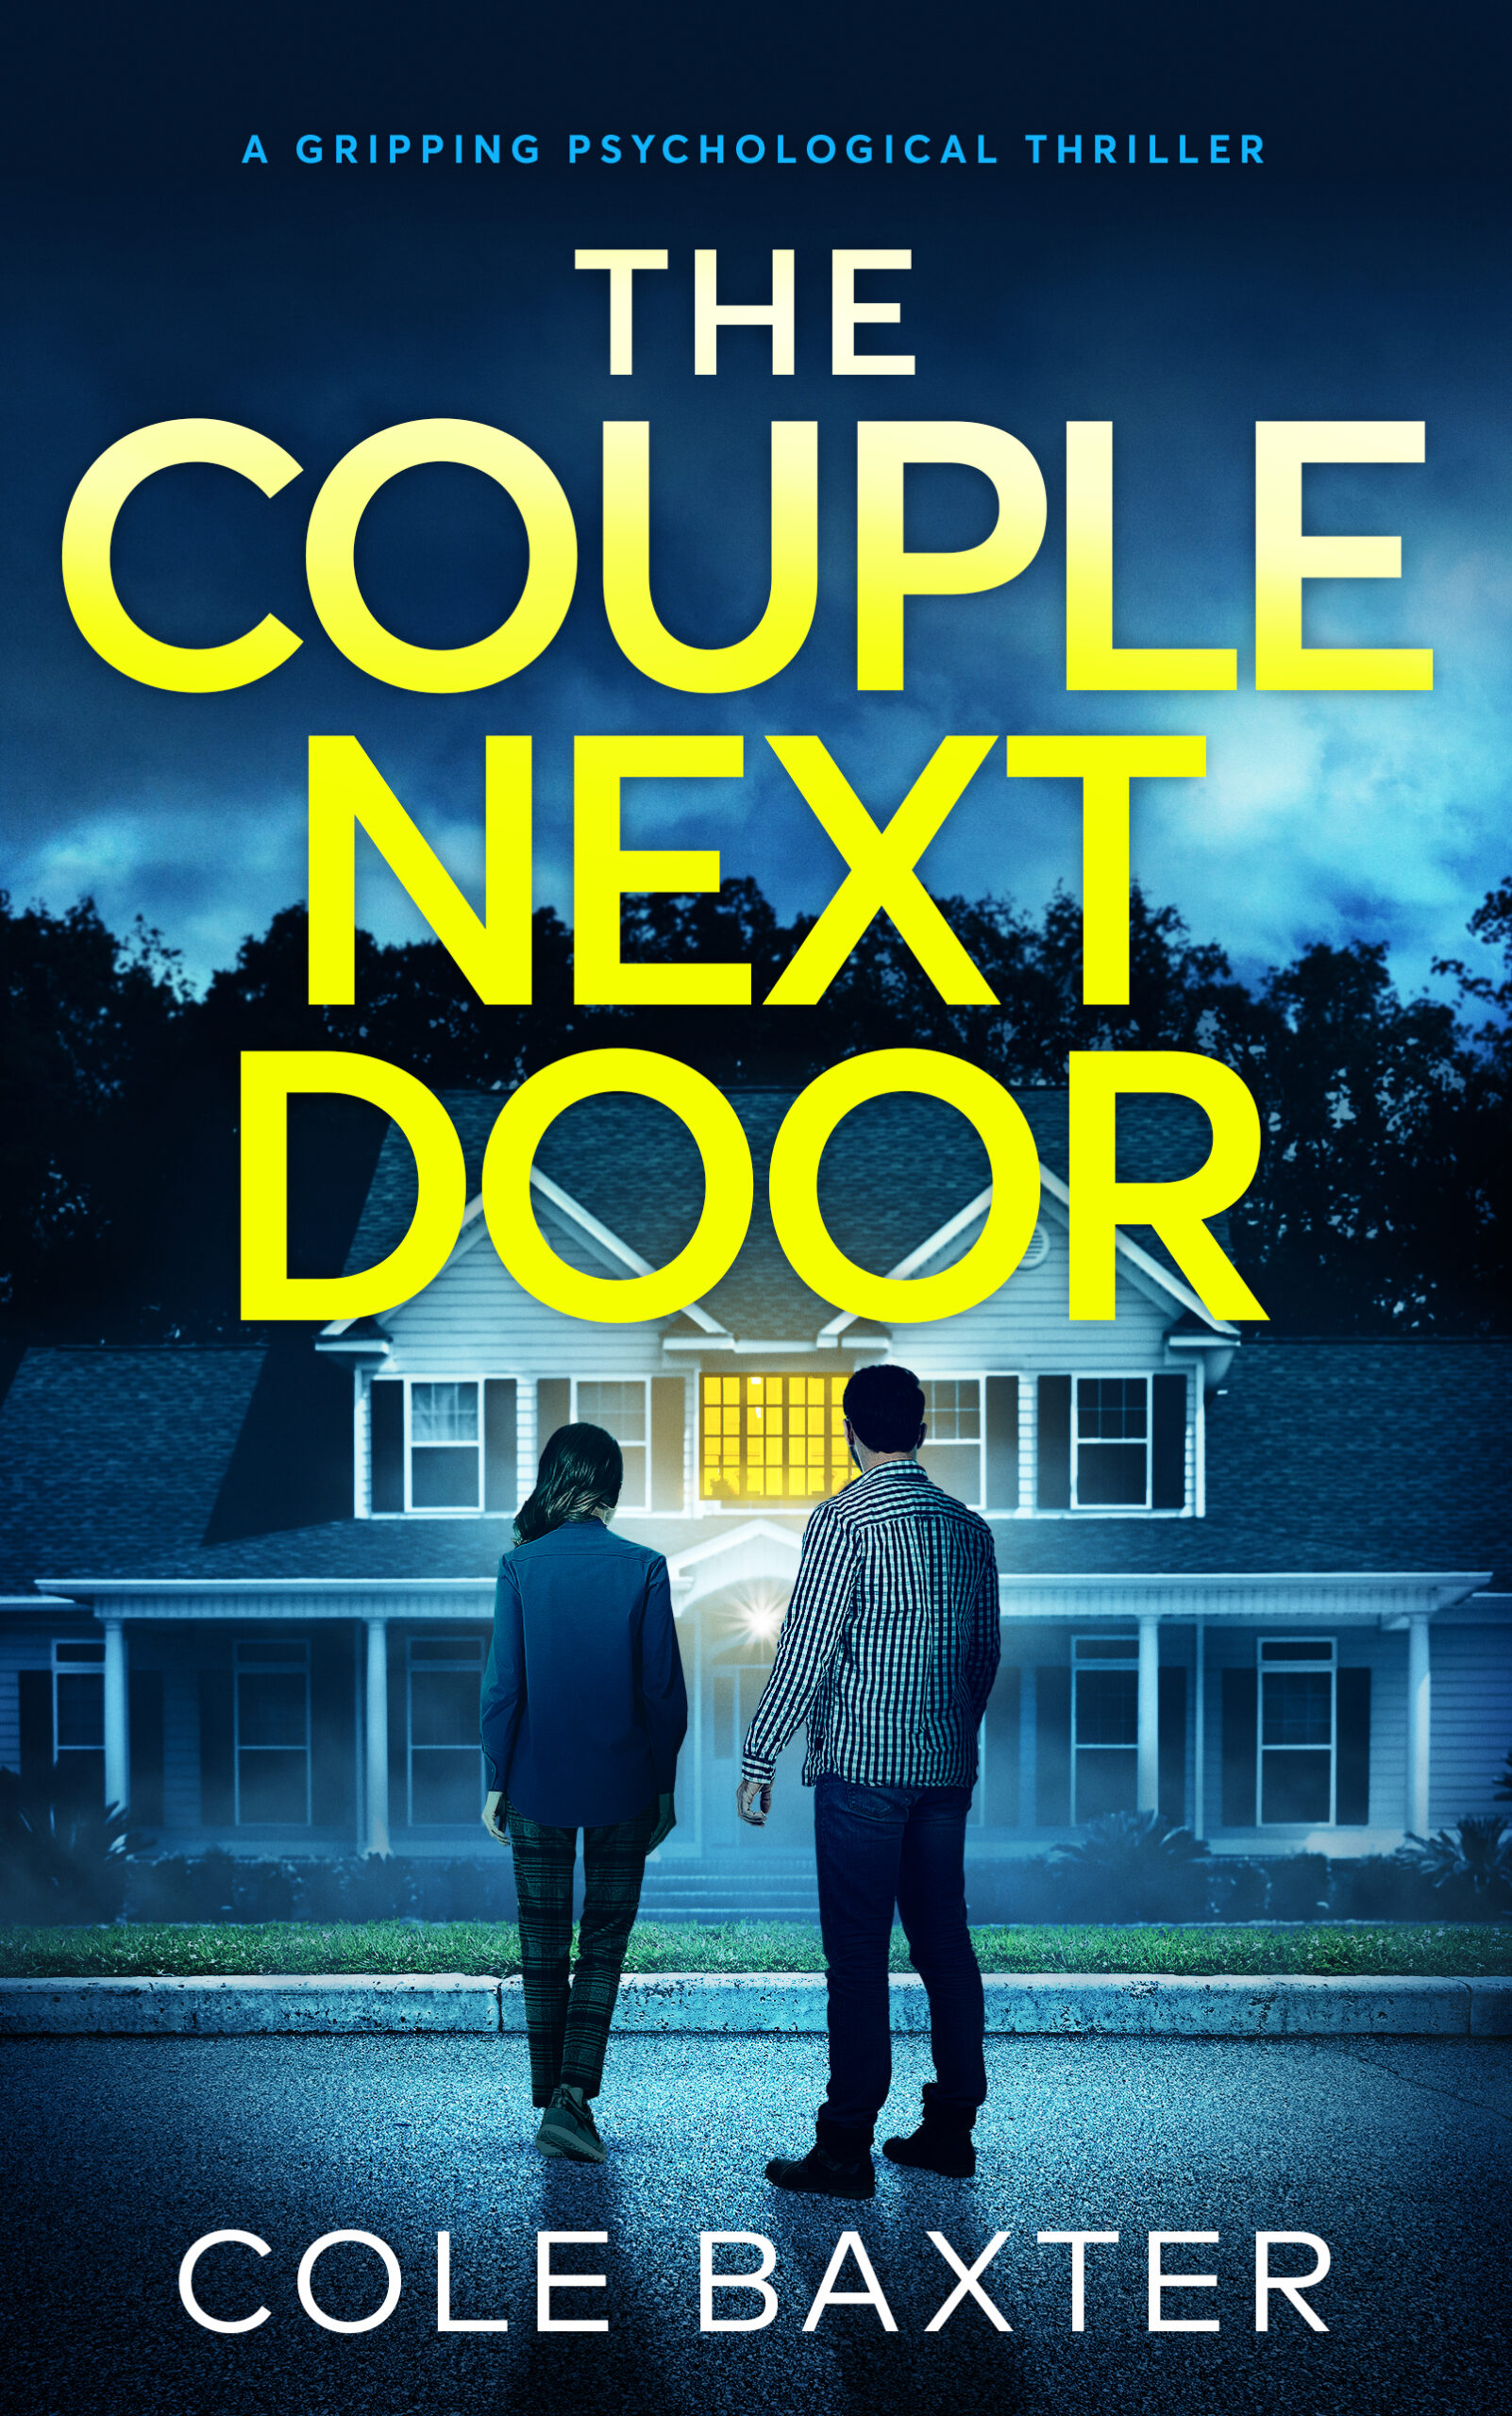 COLE BAXTER NEW RELEASE – THE COUPLE NEXT DOOR